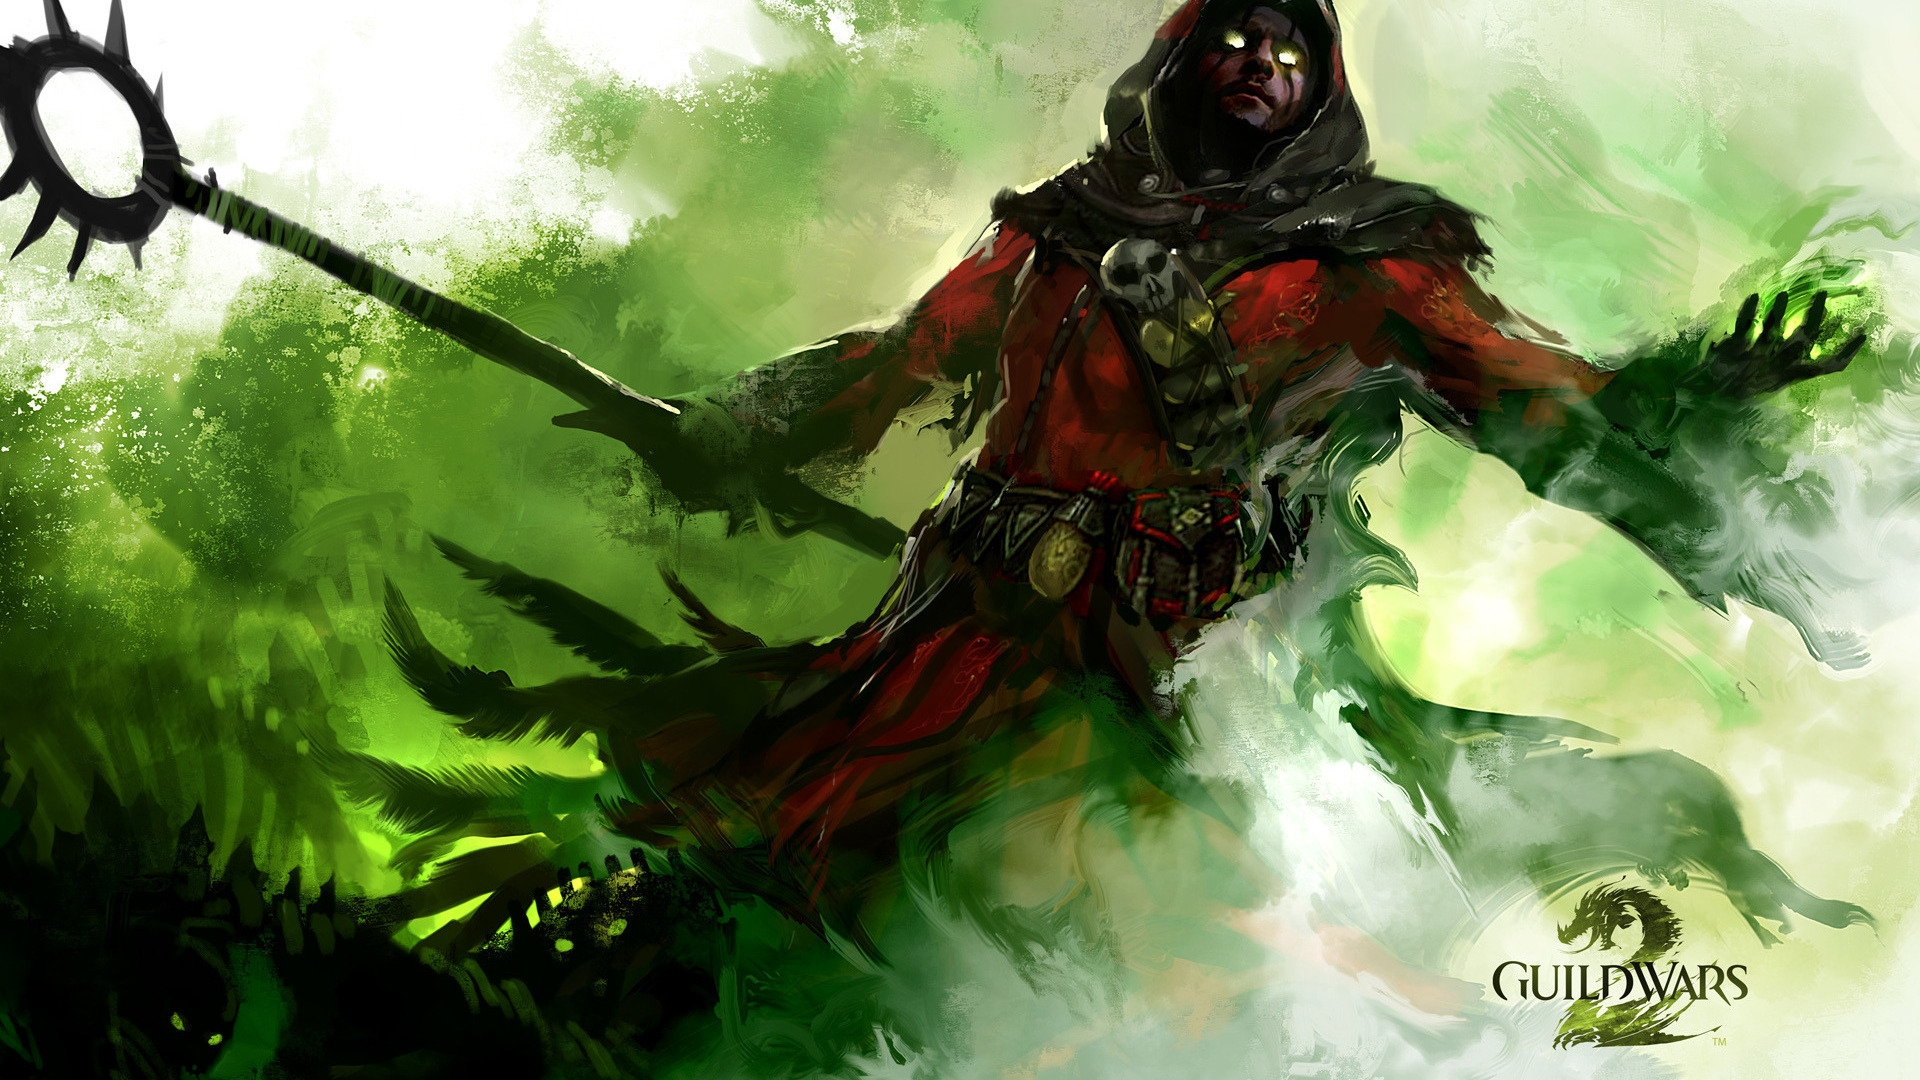 Great Guild Wars 2 for 1920 x 1080 HDTV 1080p resolution